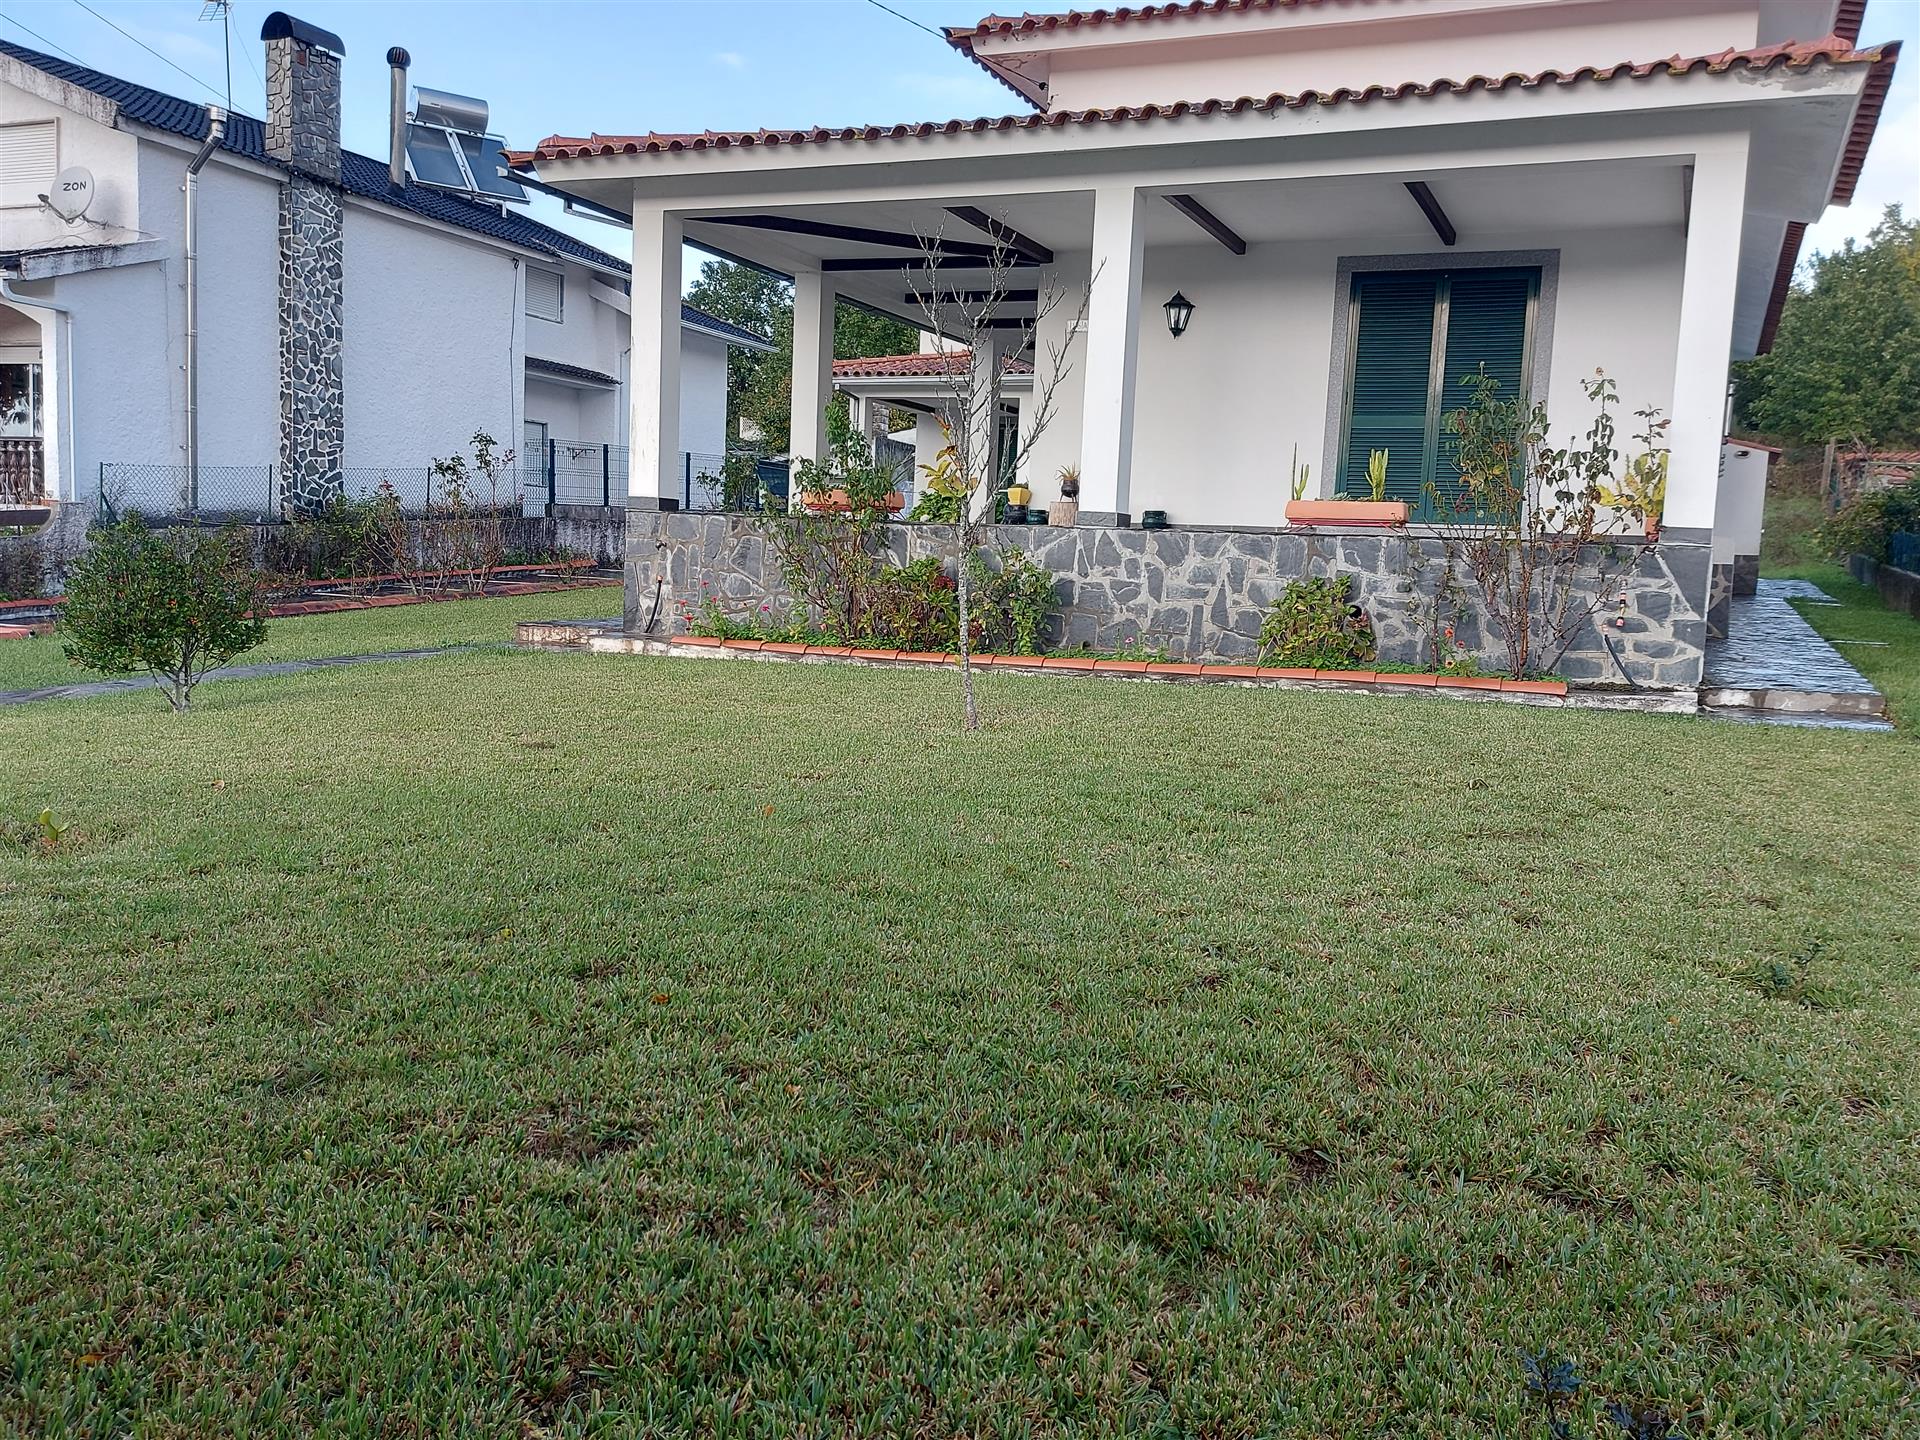 2 bedroom villa with land and garage in Côja